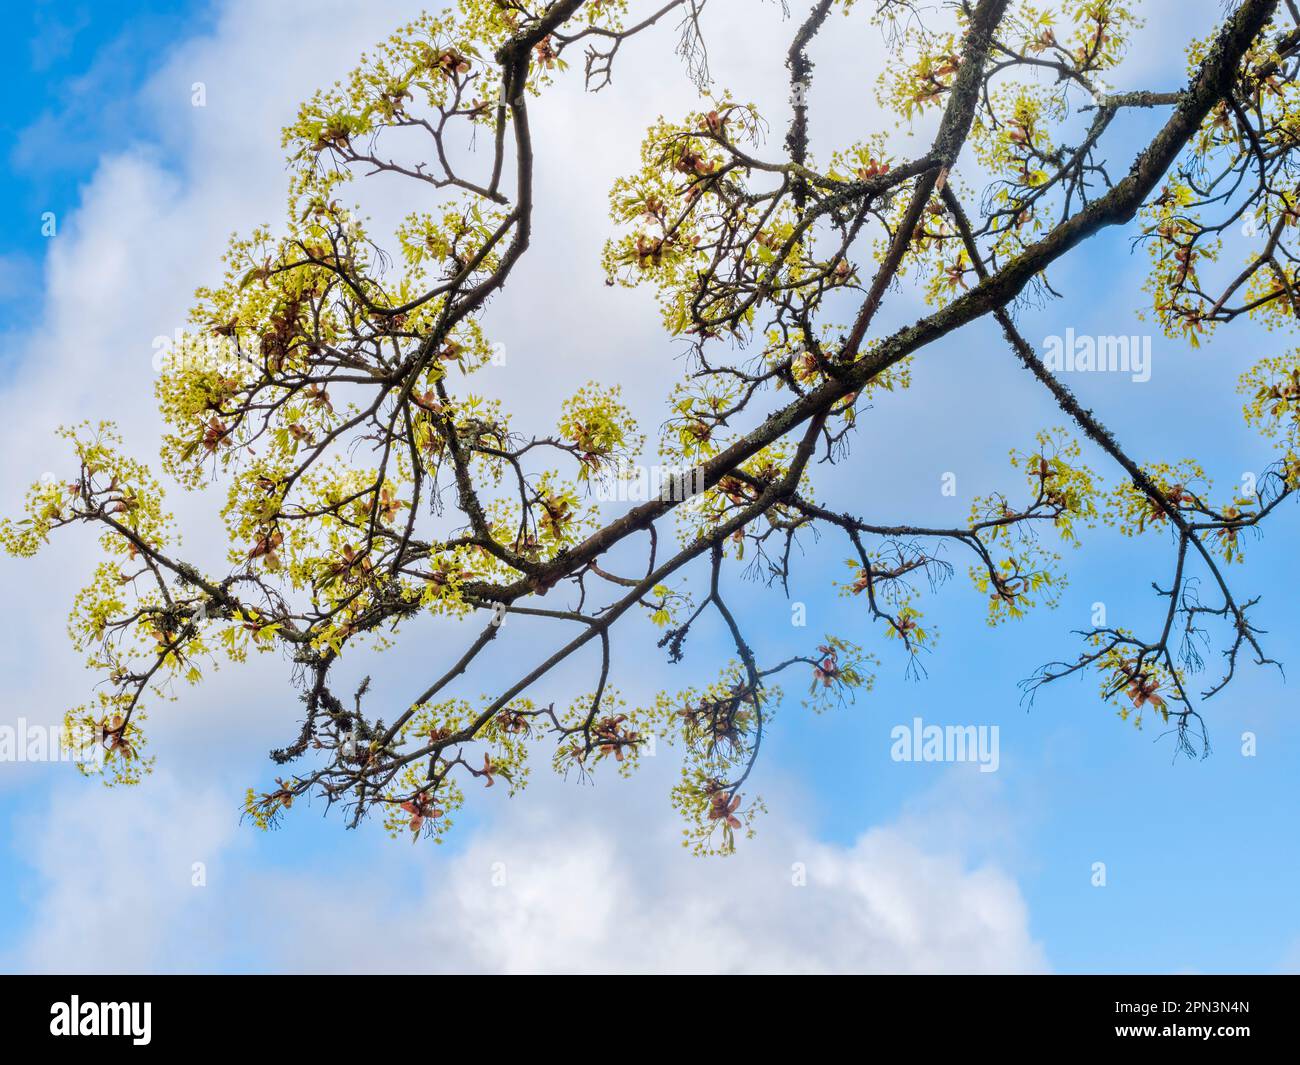 Yellow-green flowers of the UK native field maple, Acer campestre, emerge before the foliage against a spring sky Stock Photo